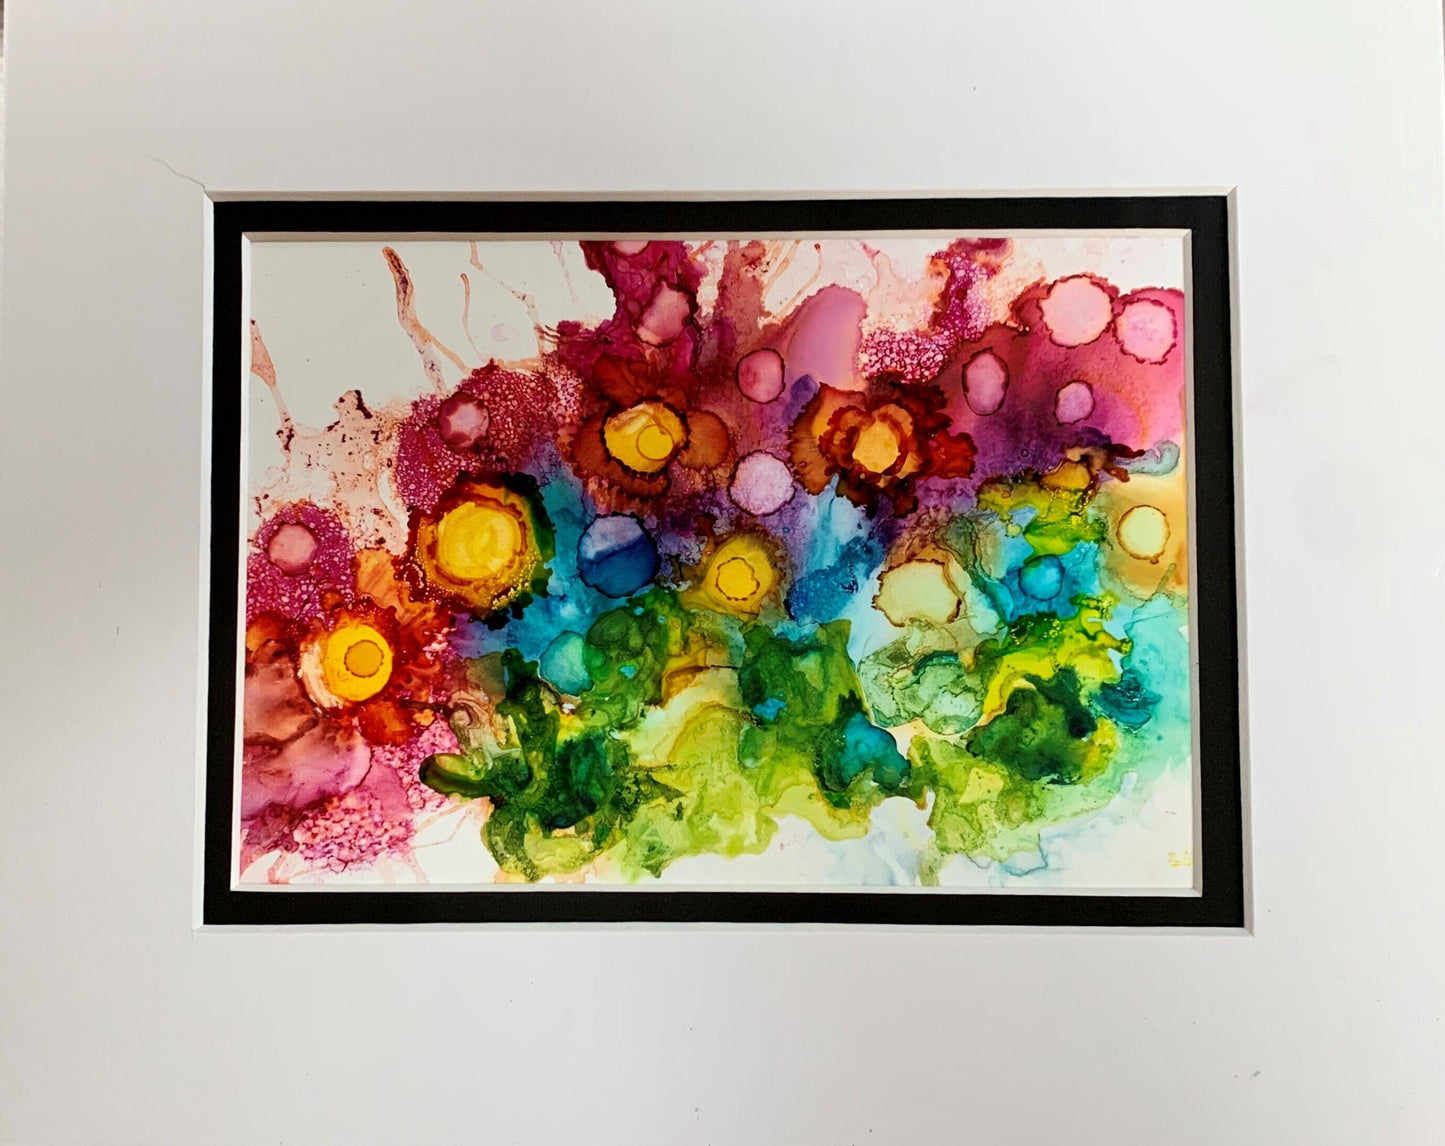 Summer Garden Ink Abstract Painting #1 Vivid Rainbow colors Whimsical art One of a kind nature wall art Garden decor flower lover gift